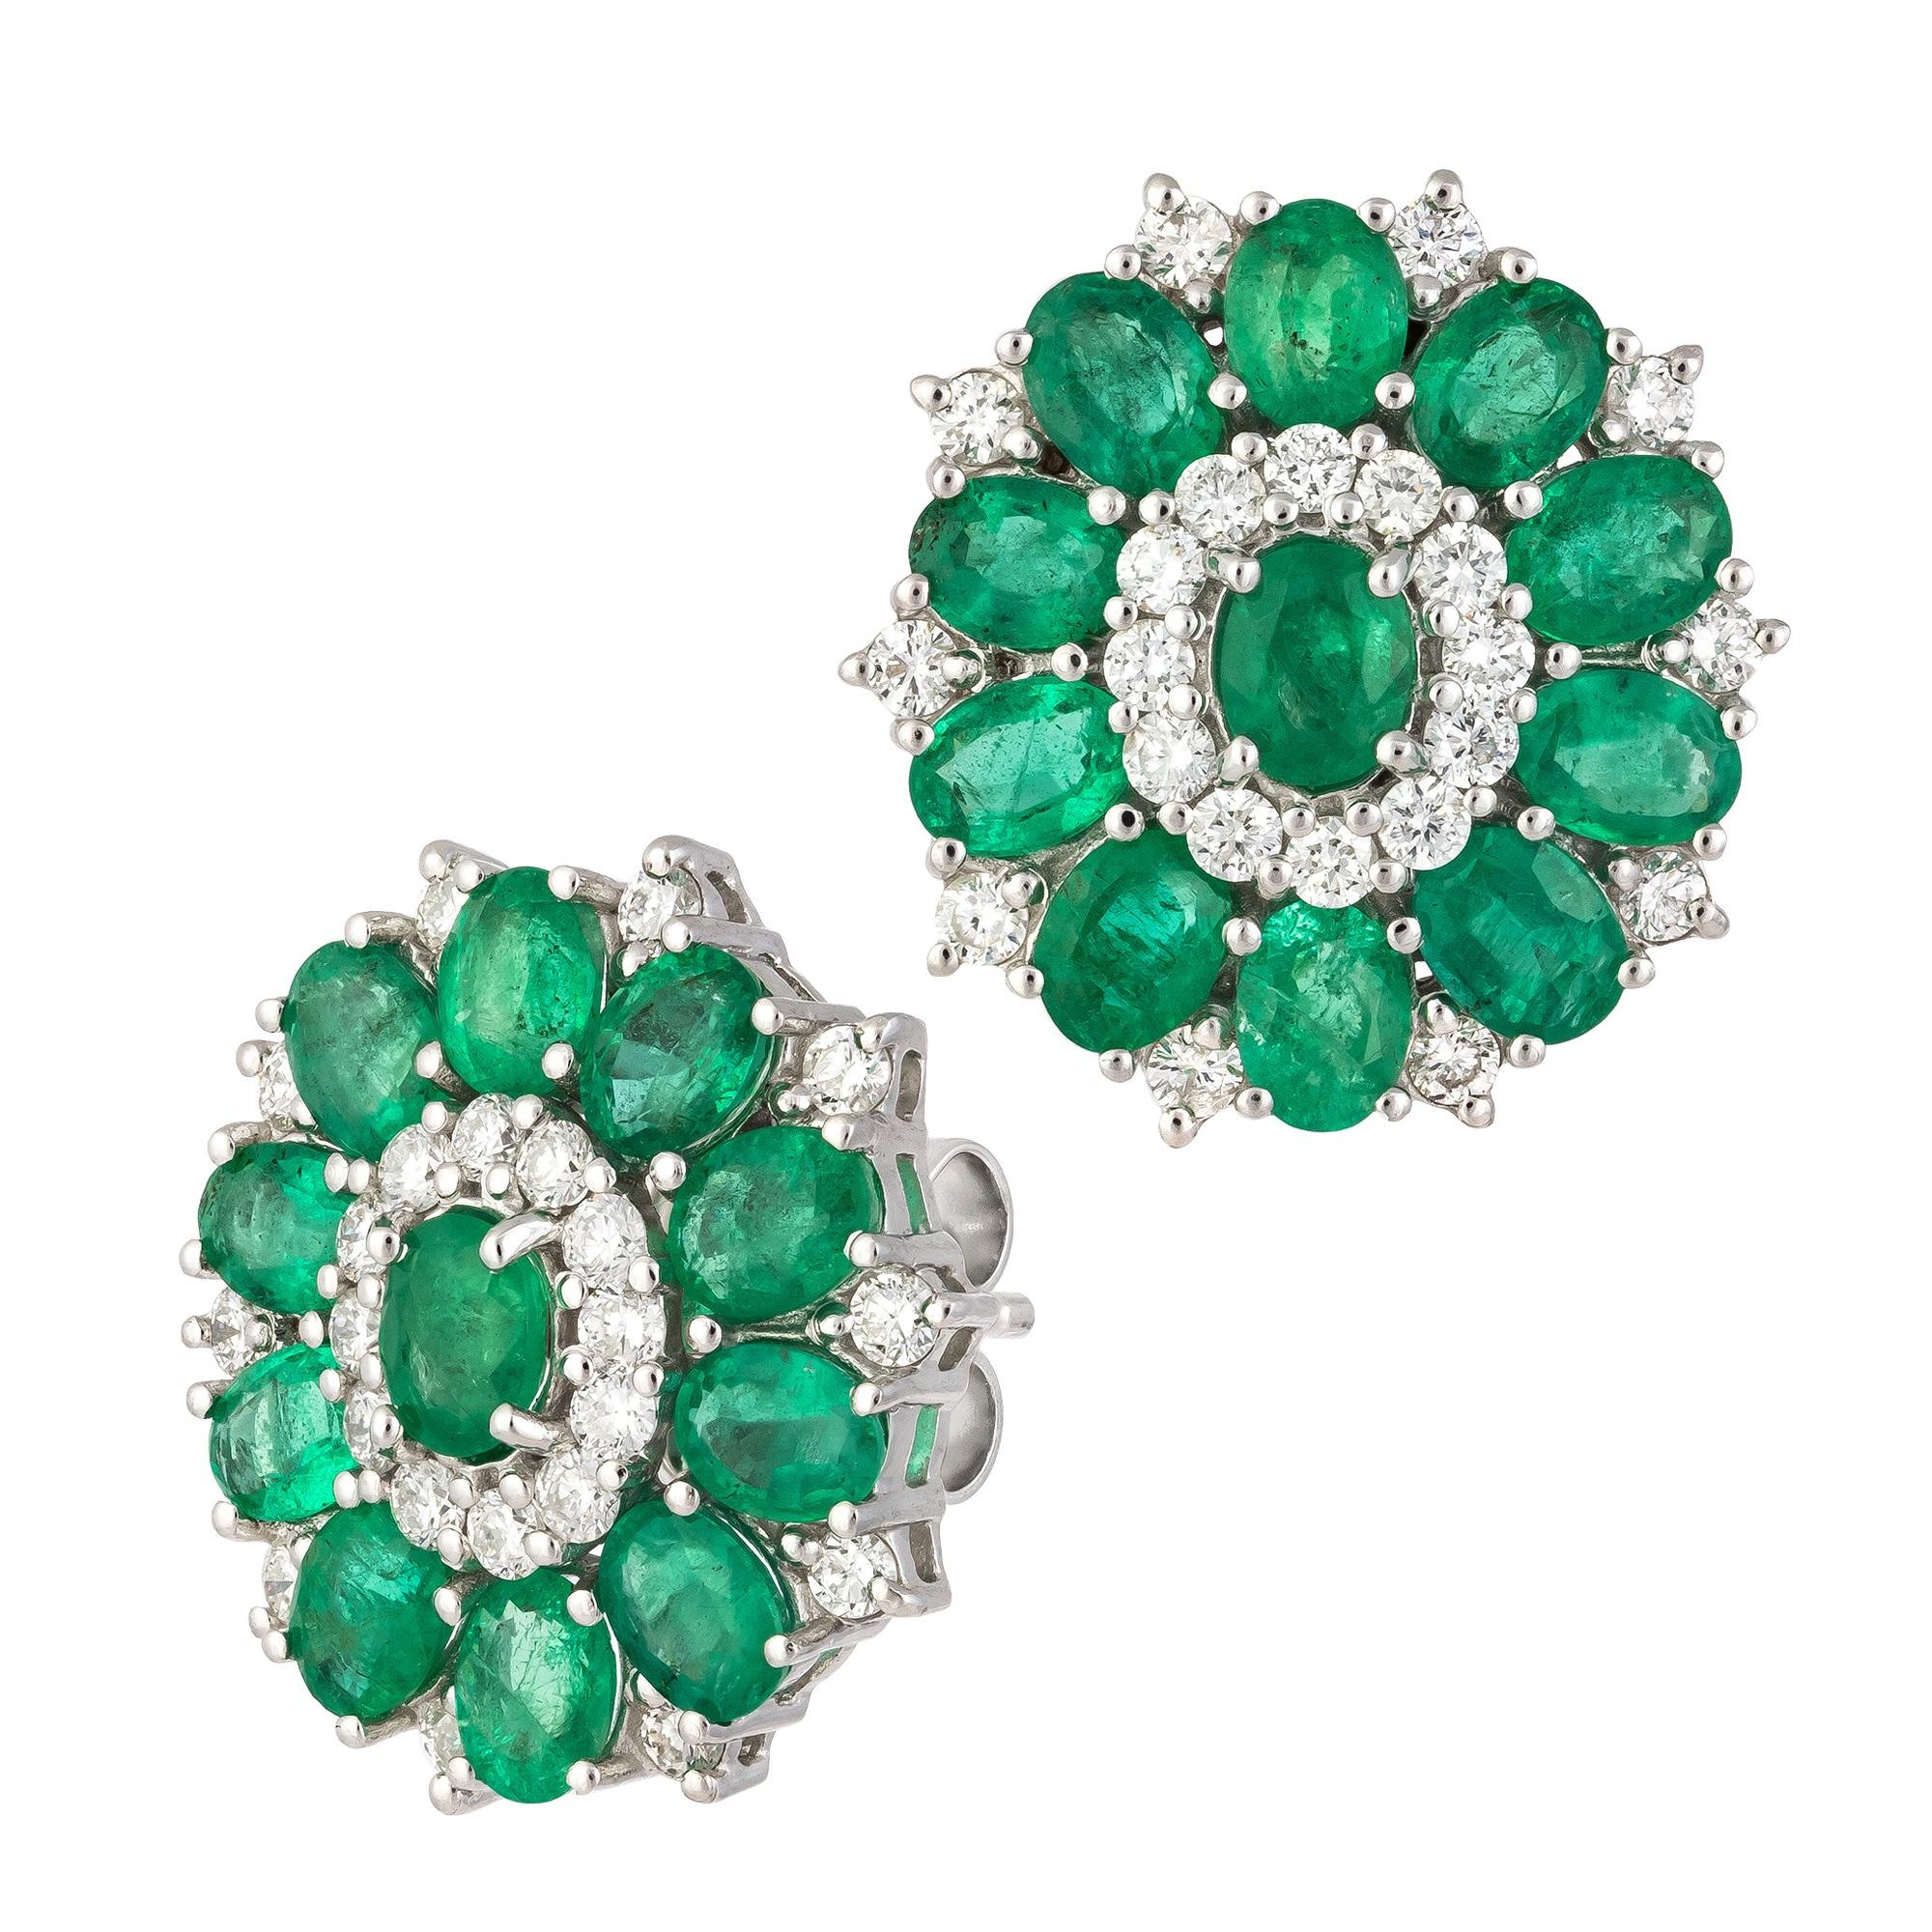 EARRING 18K White Gold Diamond 0.54 Cts/44 Pieces, Emerald 3.82 Cts/22 Pieces
